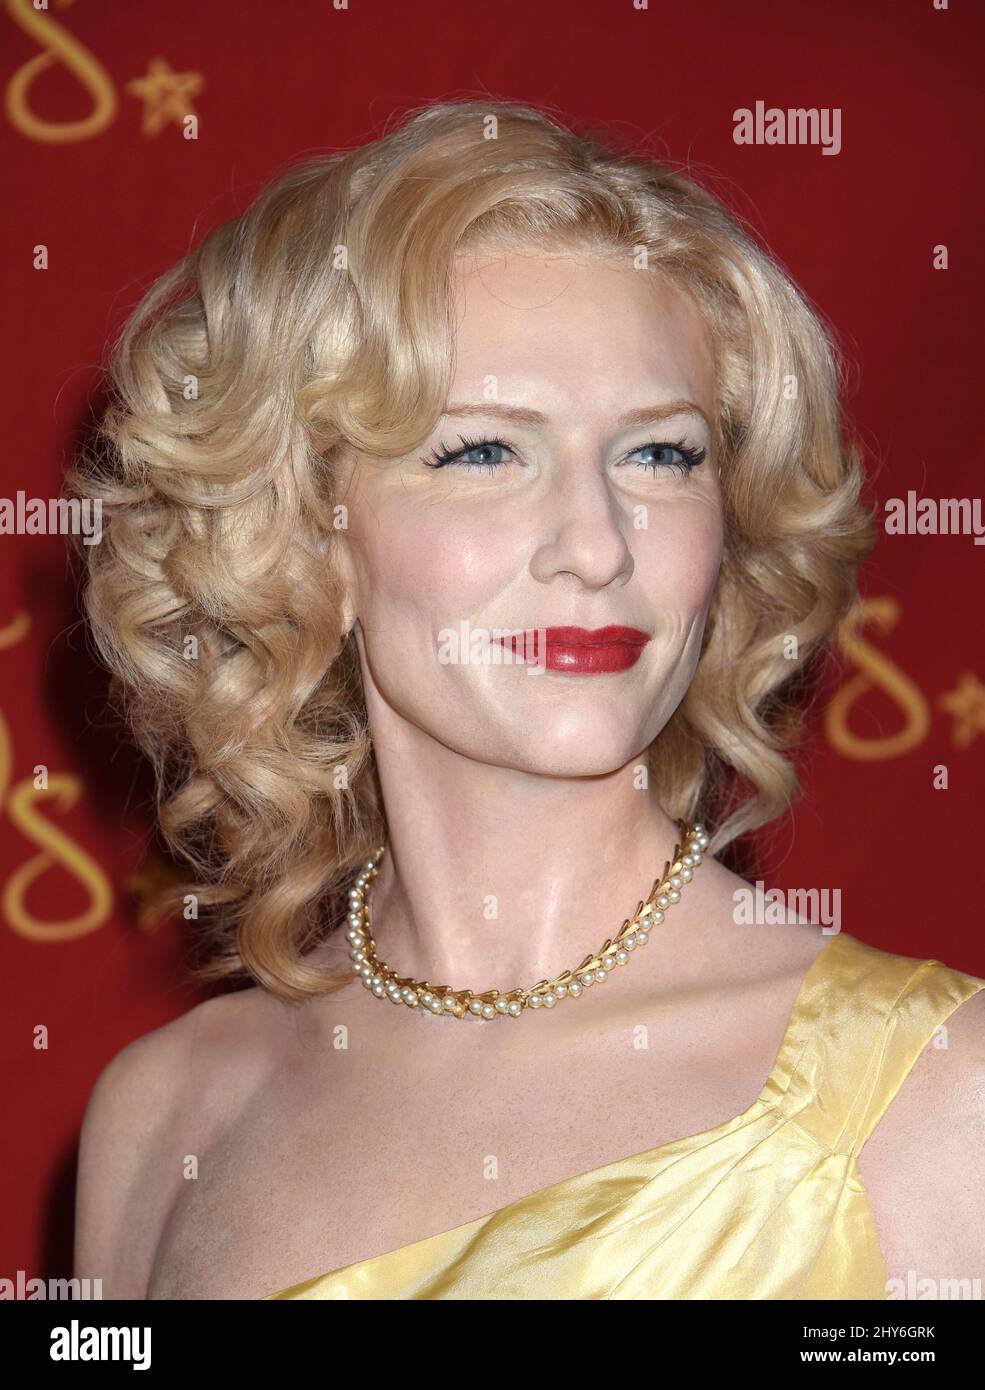 A waxwork of Cate Blanchett unveiled at Madame Tussauds in Hollywood, California. Stock Photo